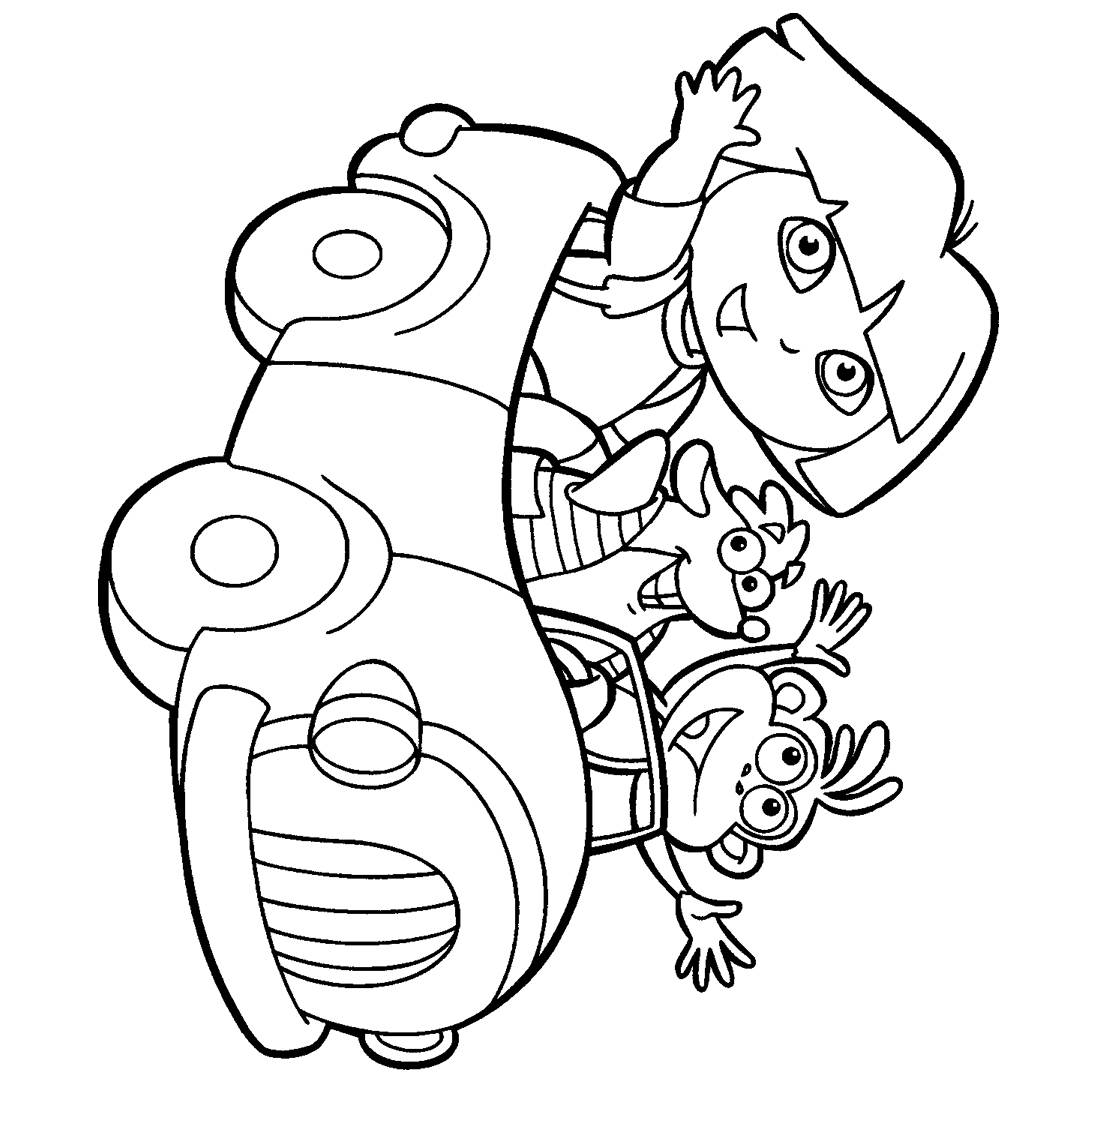 Printable Coloring Pages For Kids Coloring Pages For Kids Coloring Wallpapers Download Free Images Wallpaper [coloring436.blogspot.com]